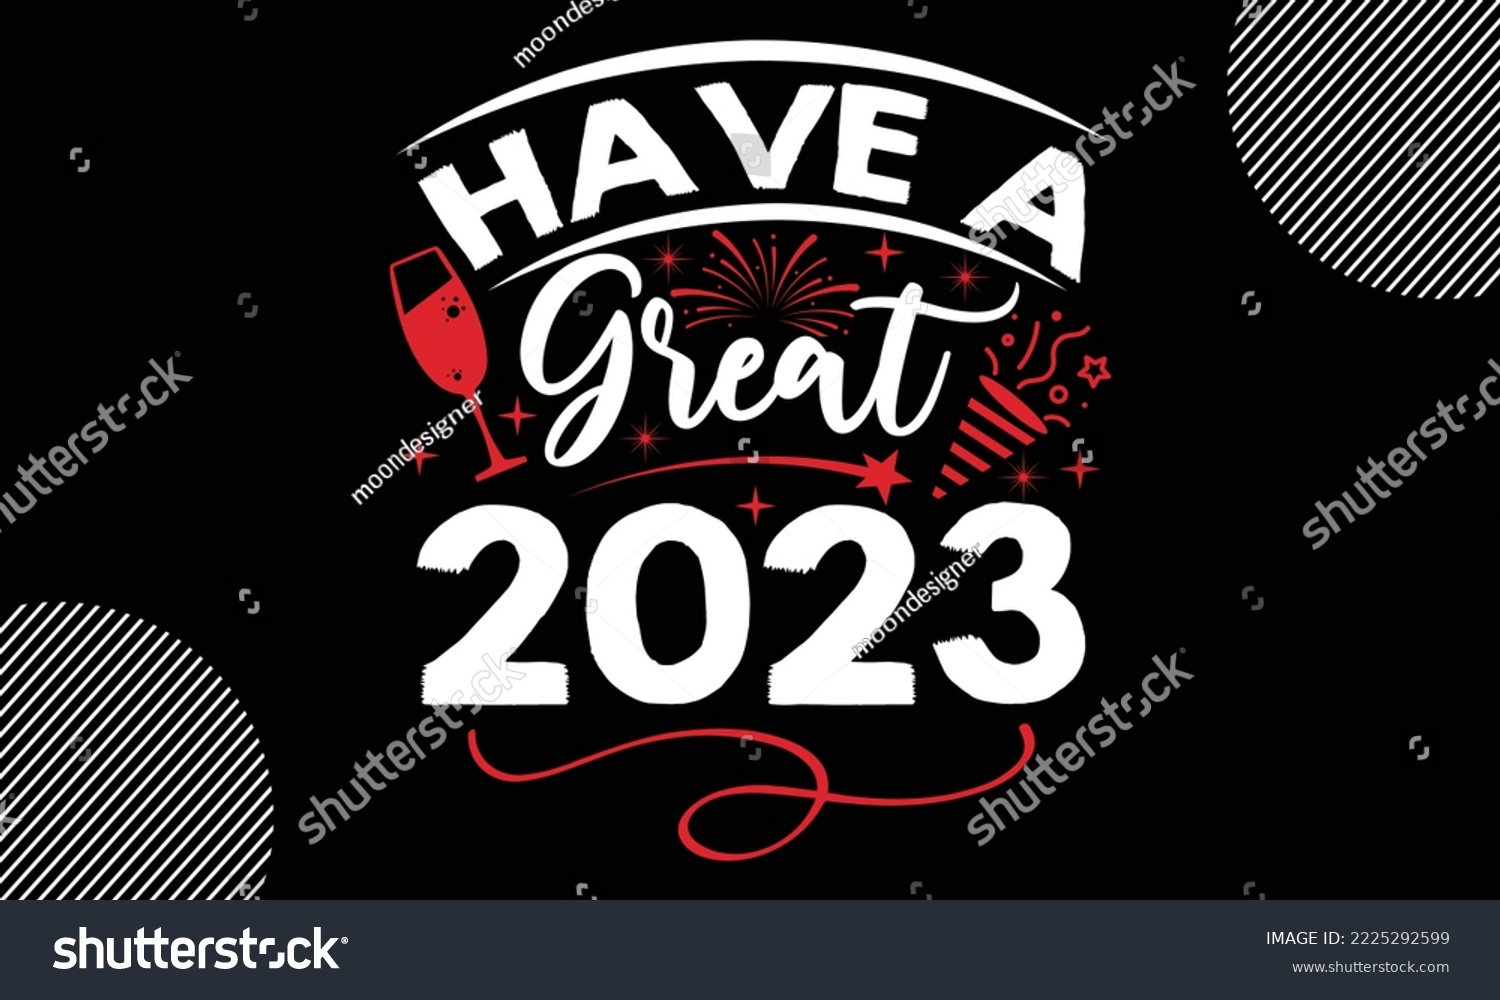 SVG of Have a great 2023- Happy New Year t shirt Design,  Handmade calligraphy vector illustration, SVG Files for Cutting, EPS, bag, cups, card, gift and other printing svg